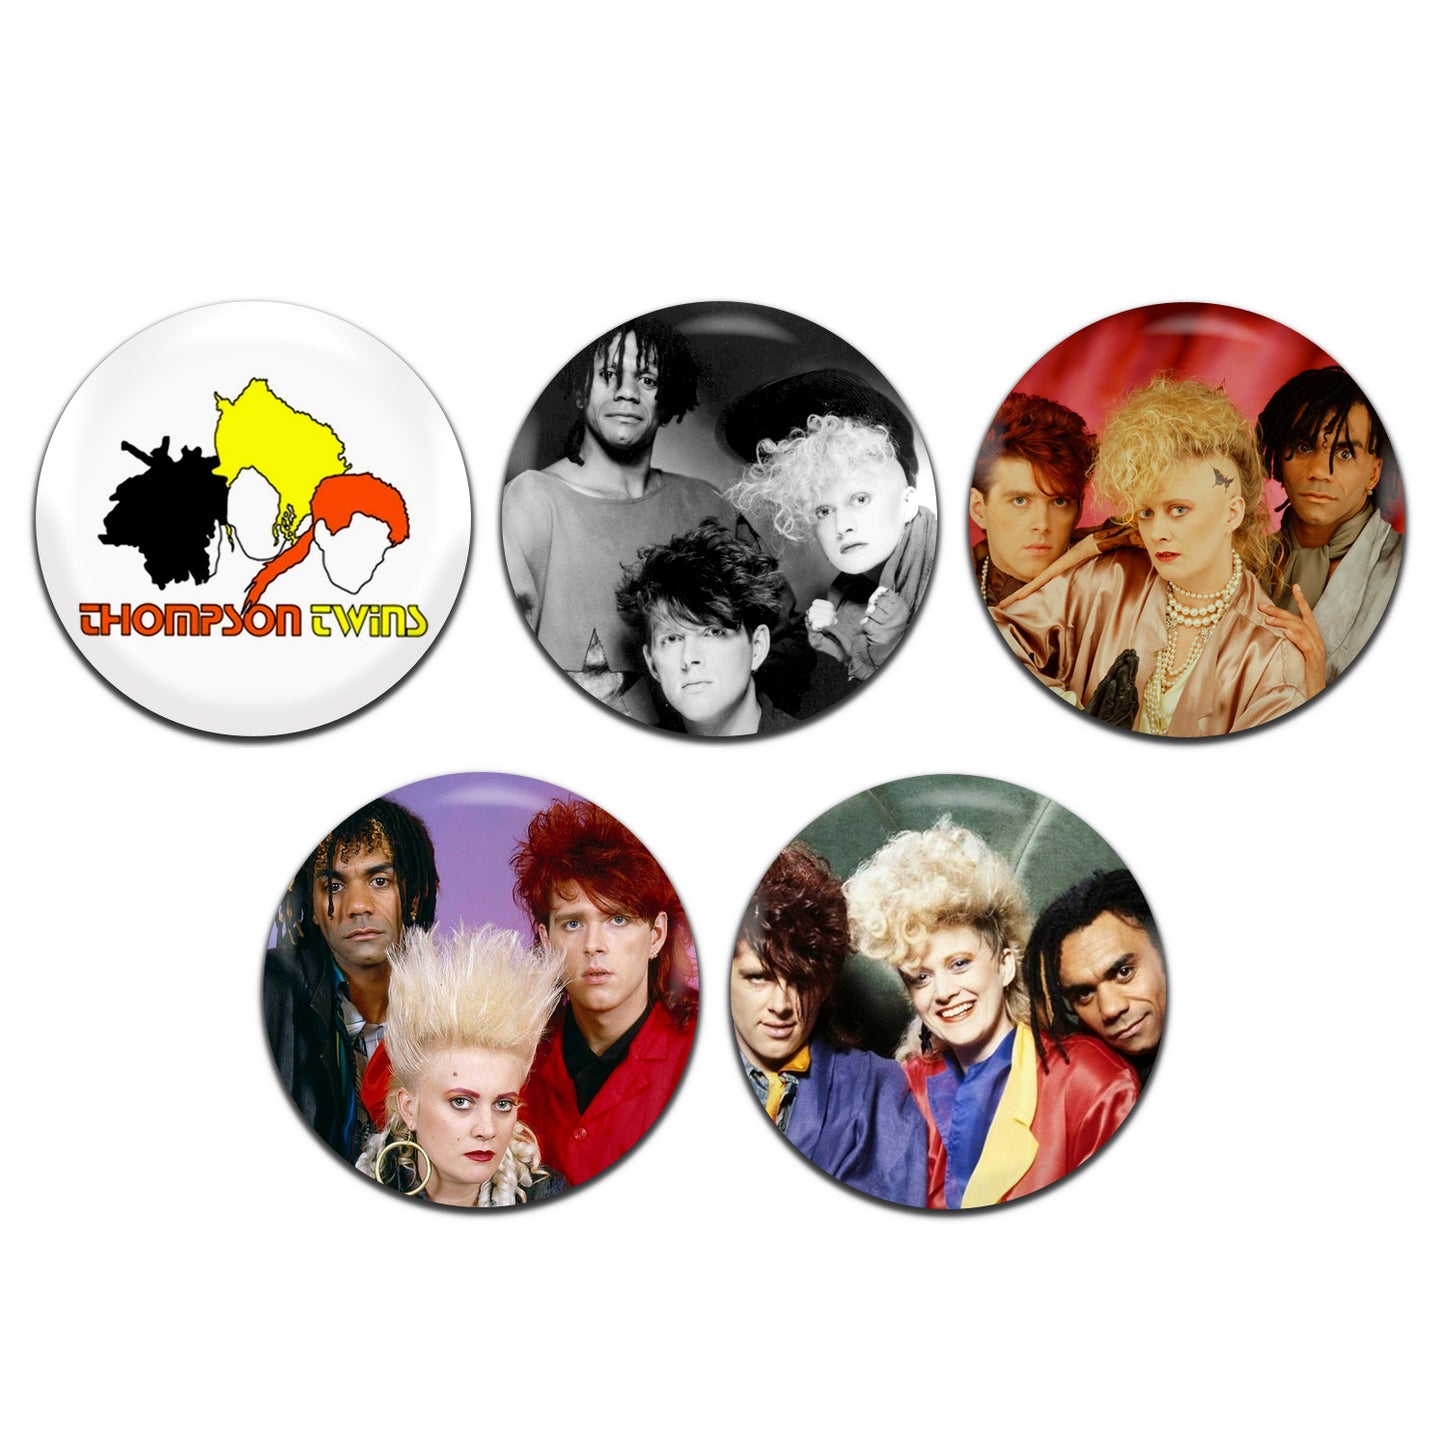 Thompson Twins Synth Pop New Wave Band 80's 25mm / 1 Inch D-Pin Button Badges (5x Set)